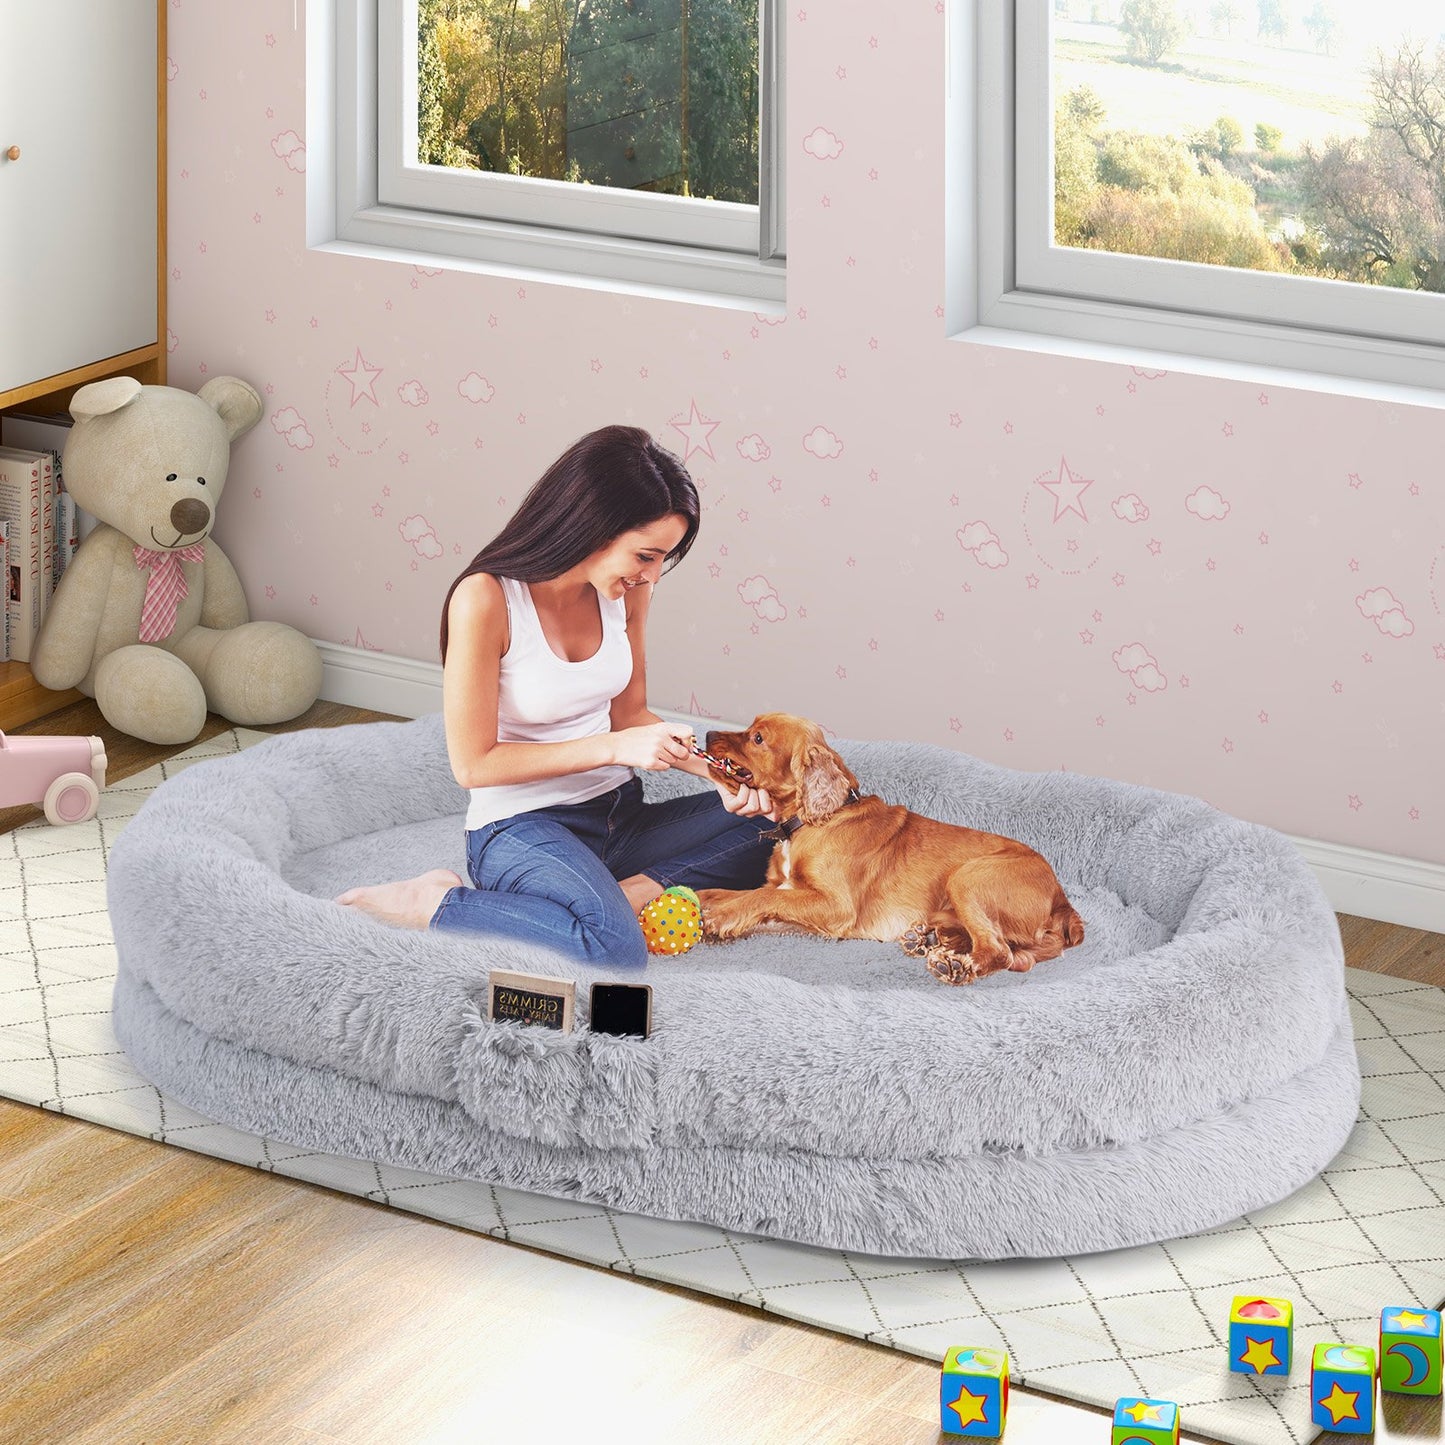 Washable Fluffy Human Dog Bed with Soft Blanket and Plump Pillow, Gray